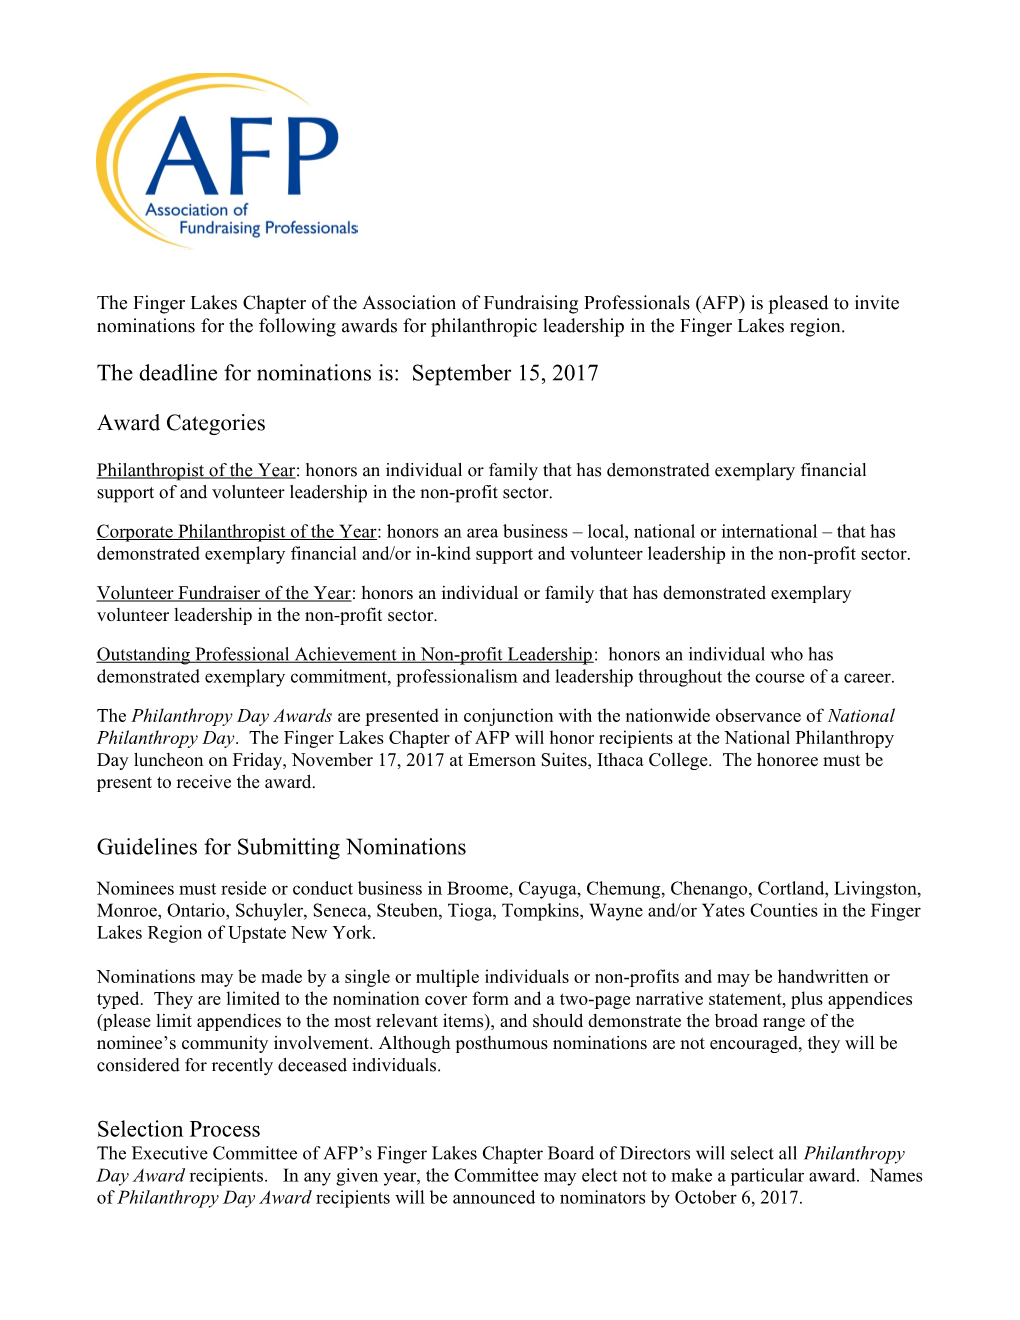 The Finger Lakes Chapter of the Association of Fund Raising Professionals (AFP) Is Pleased